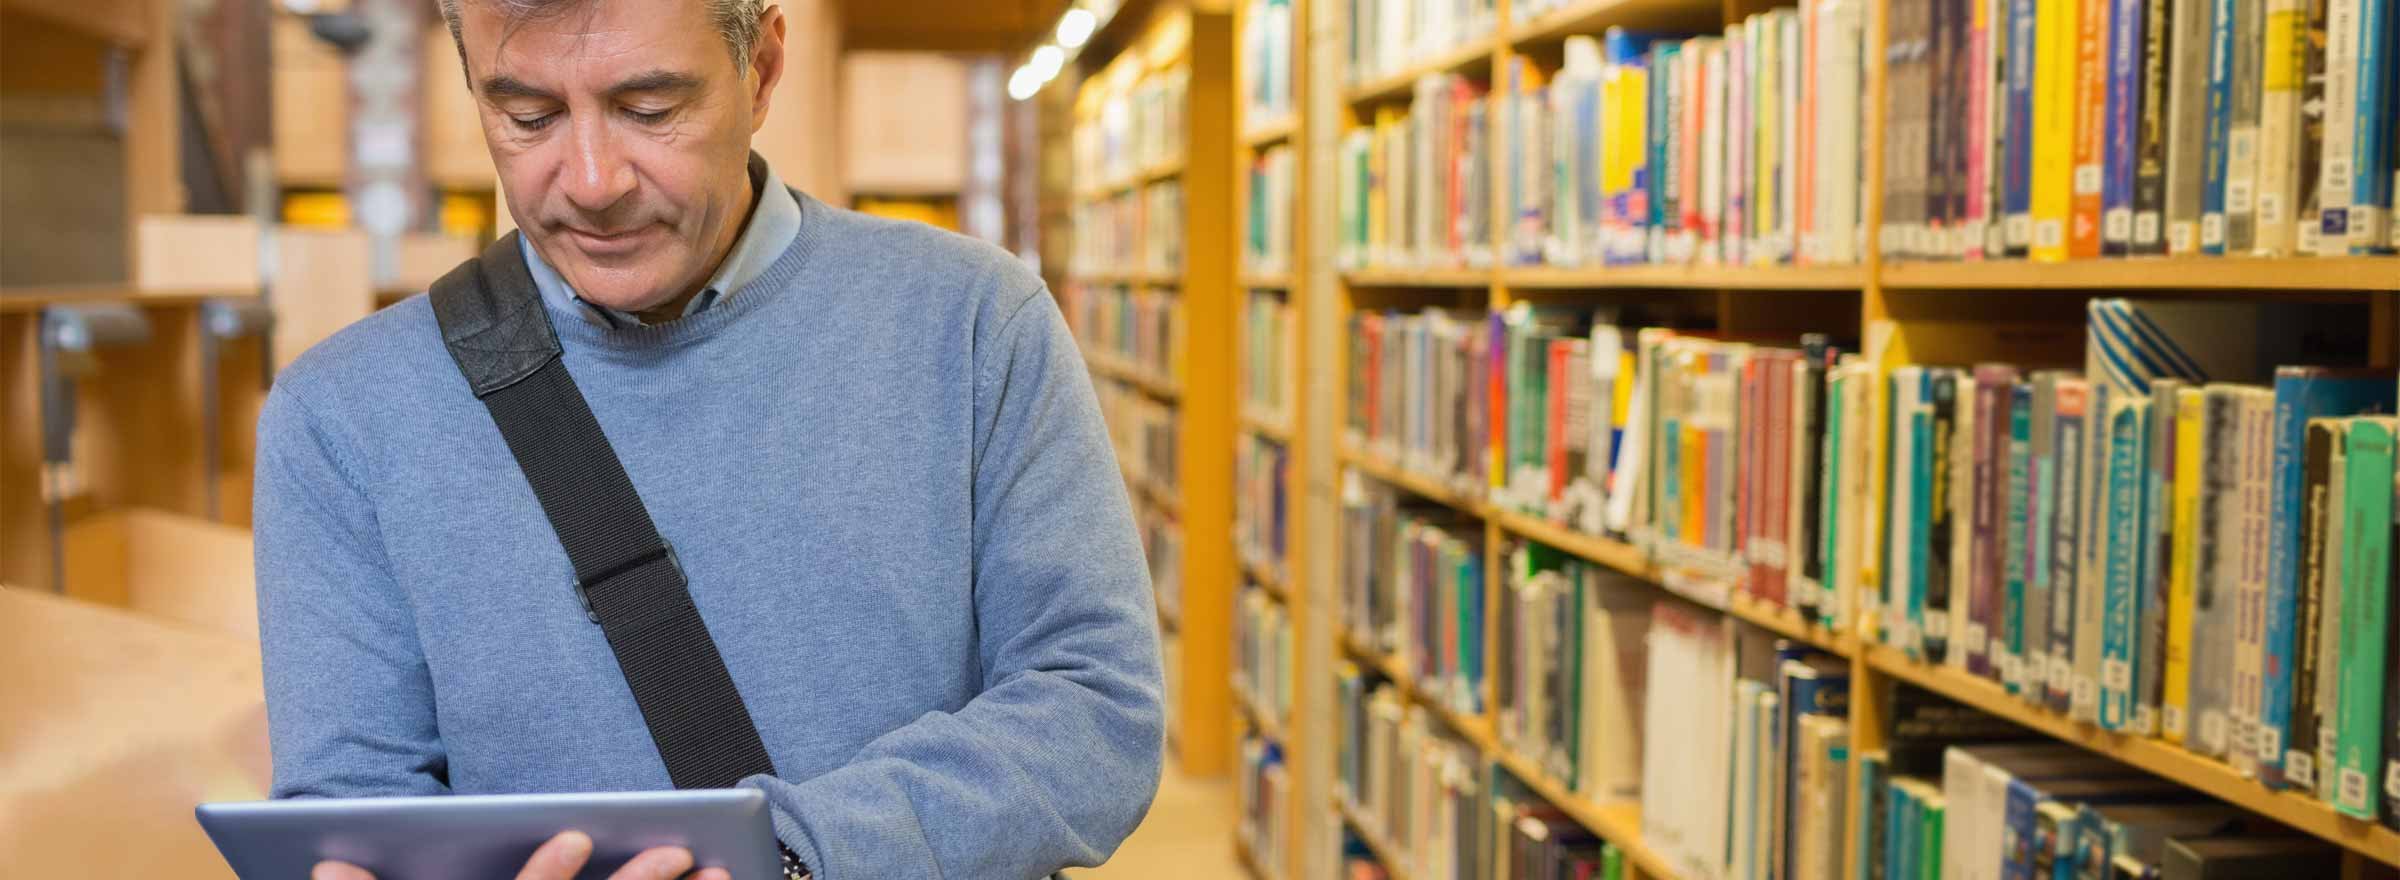 man using a tablet in a library